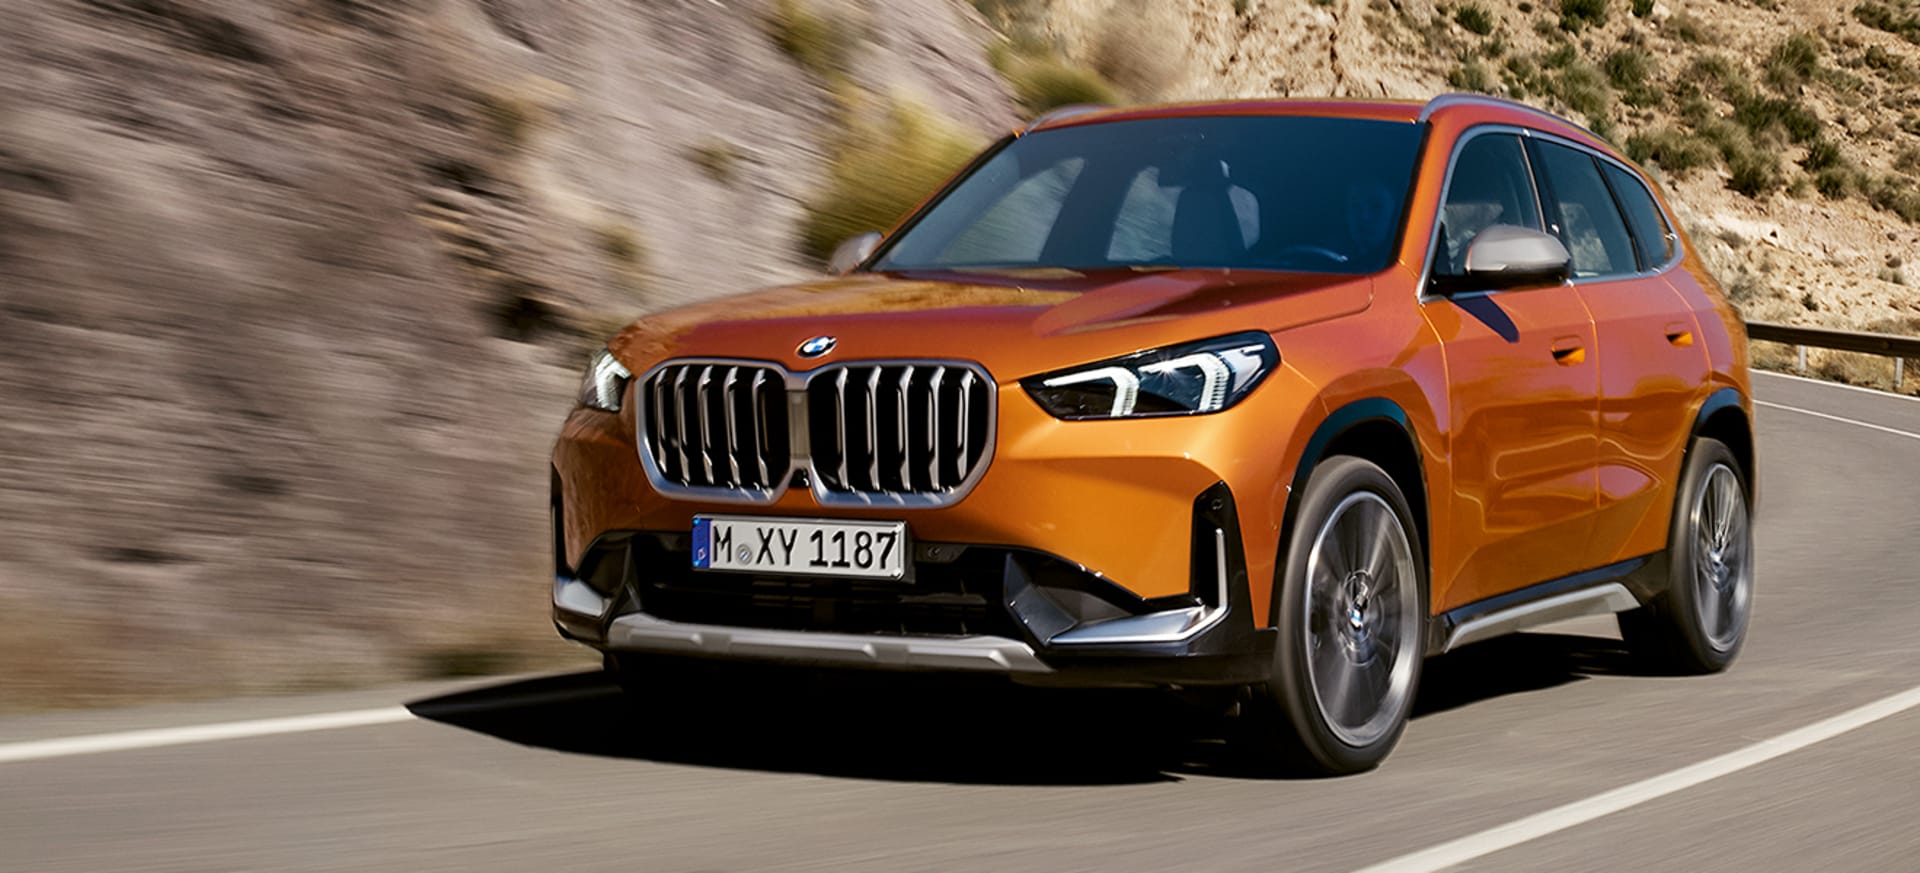 THE NEW BMW X1.